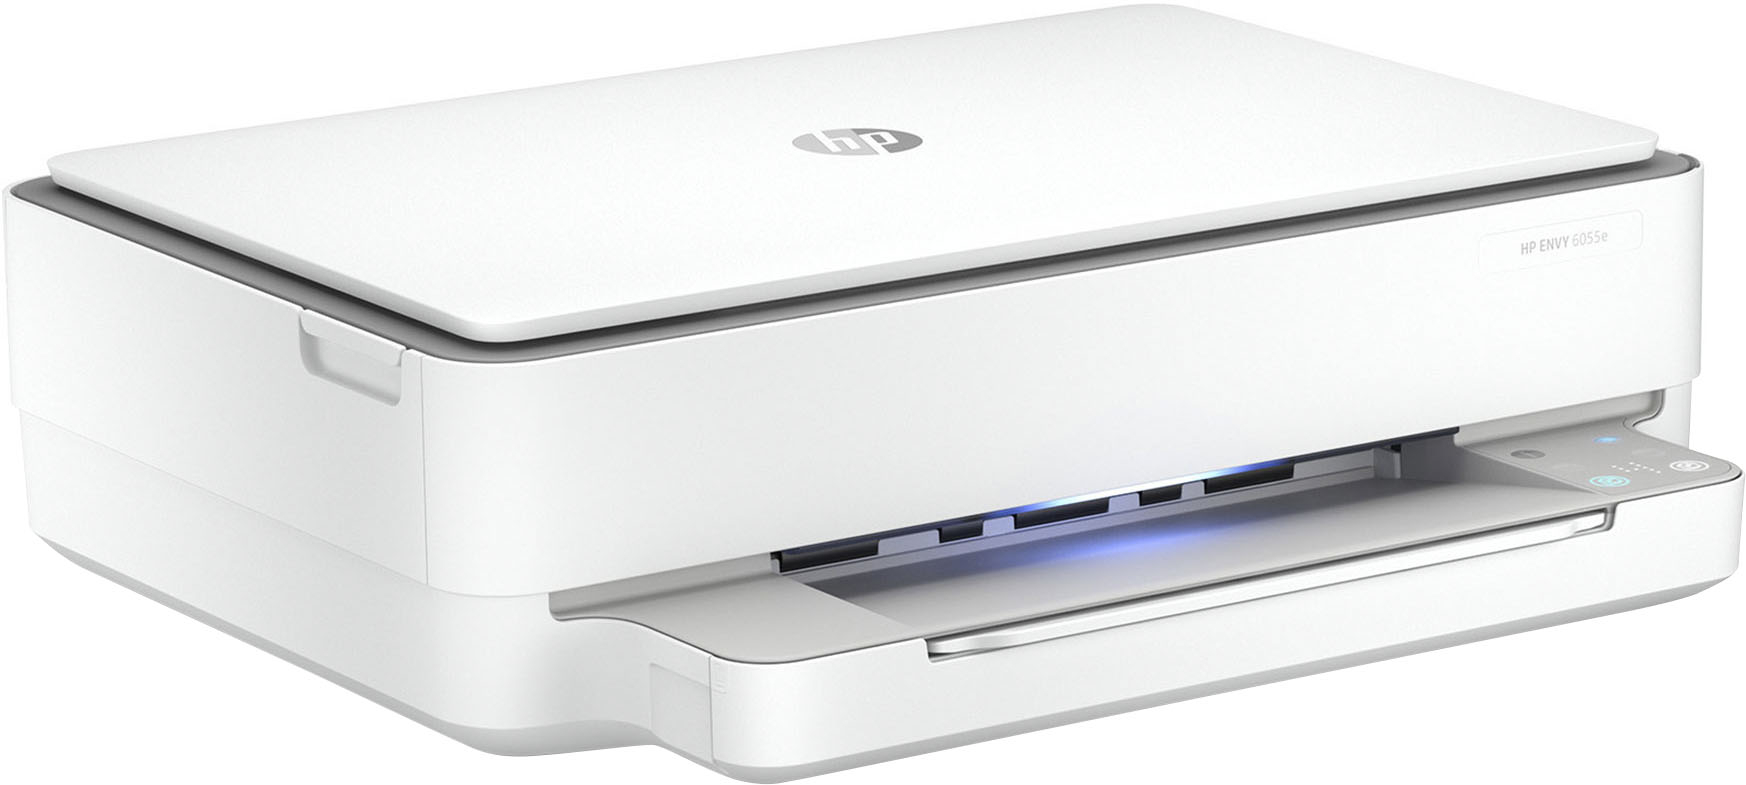 Angle View: HP - ENVY 6055e Wireless Inkjet Printer with 3 months of Instant Ink Included with HP+ - White